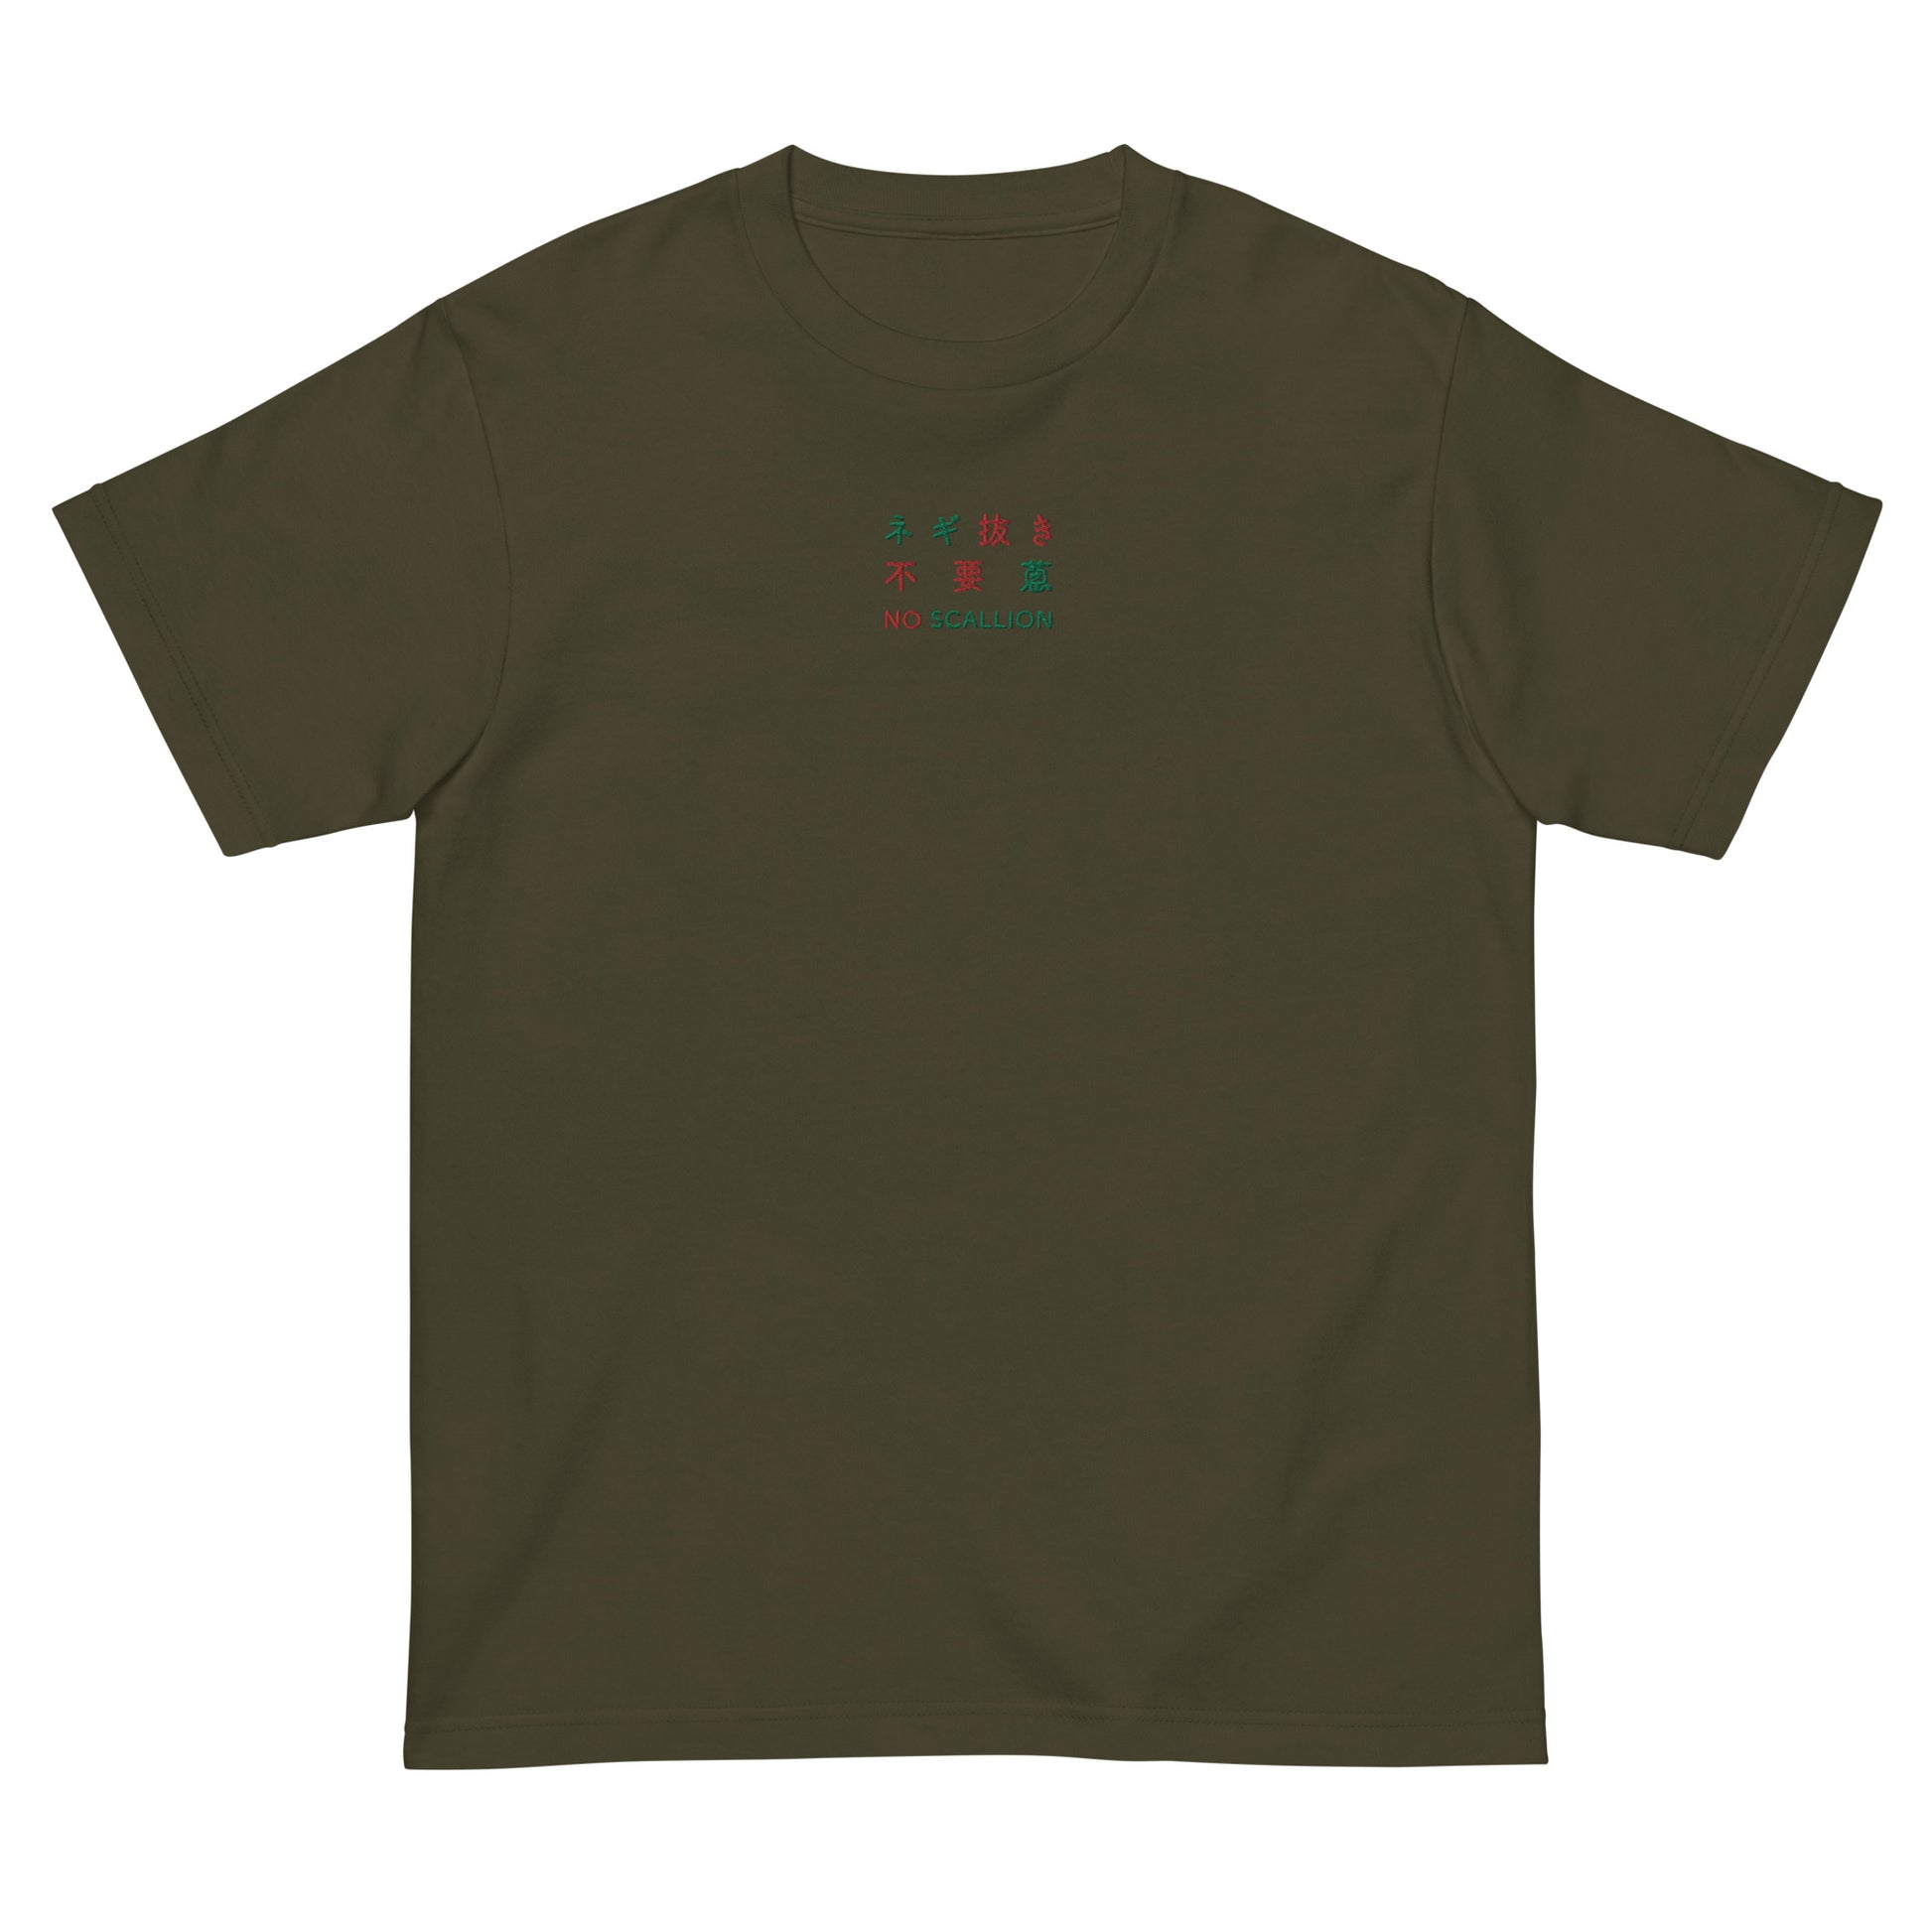 Green High Quality Tee - Front Design with Red/Green Embroidery "NO SCALLIONit" in English, Japanese and Chinese